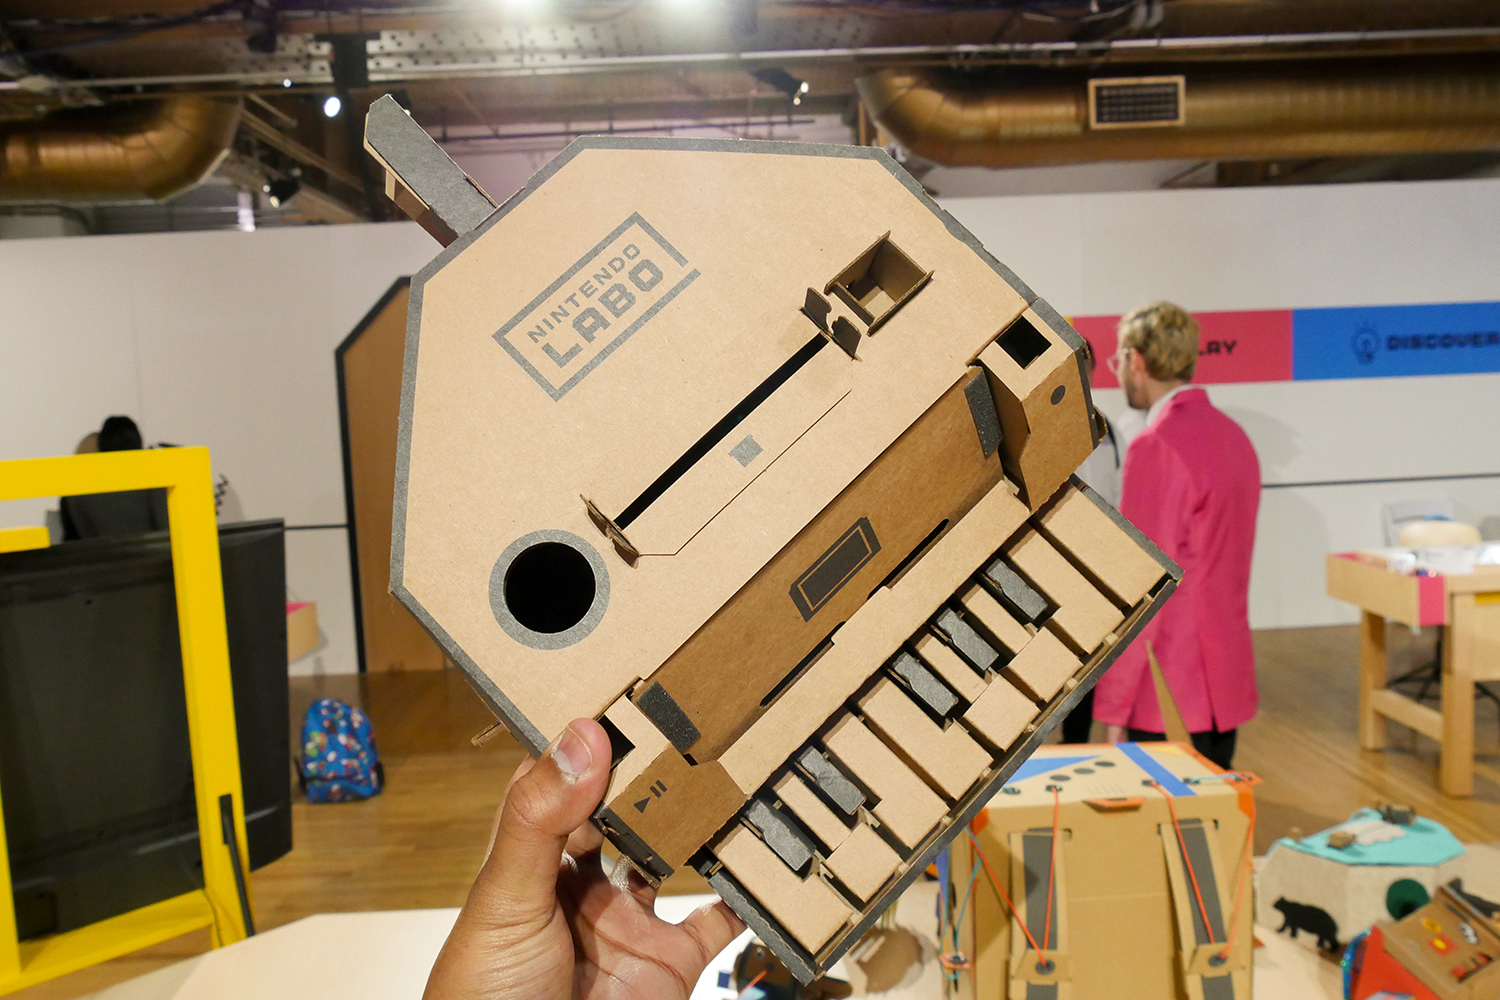 Don't Worry, You Can Purchase Replacement Nintendo Labo Parts